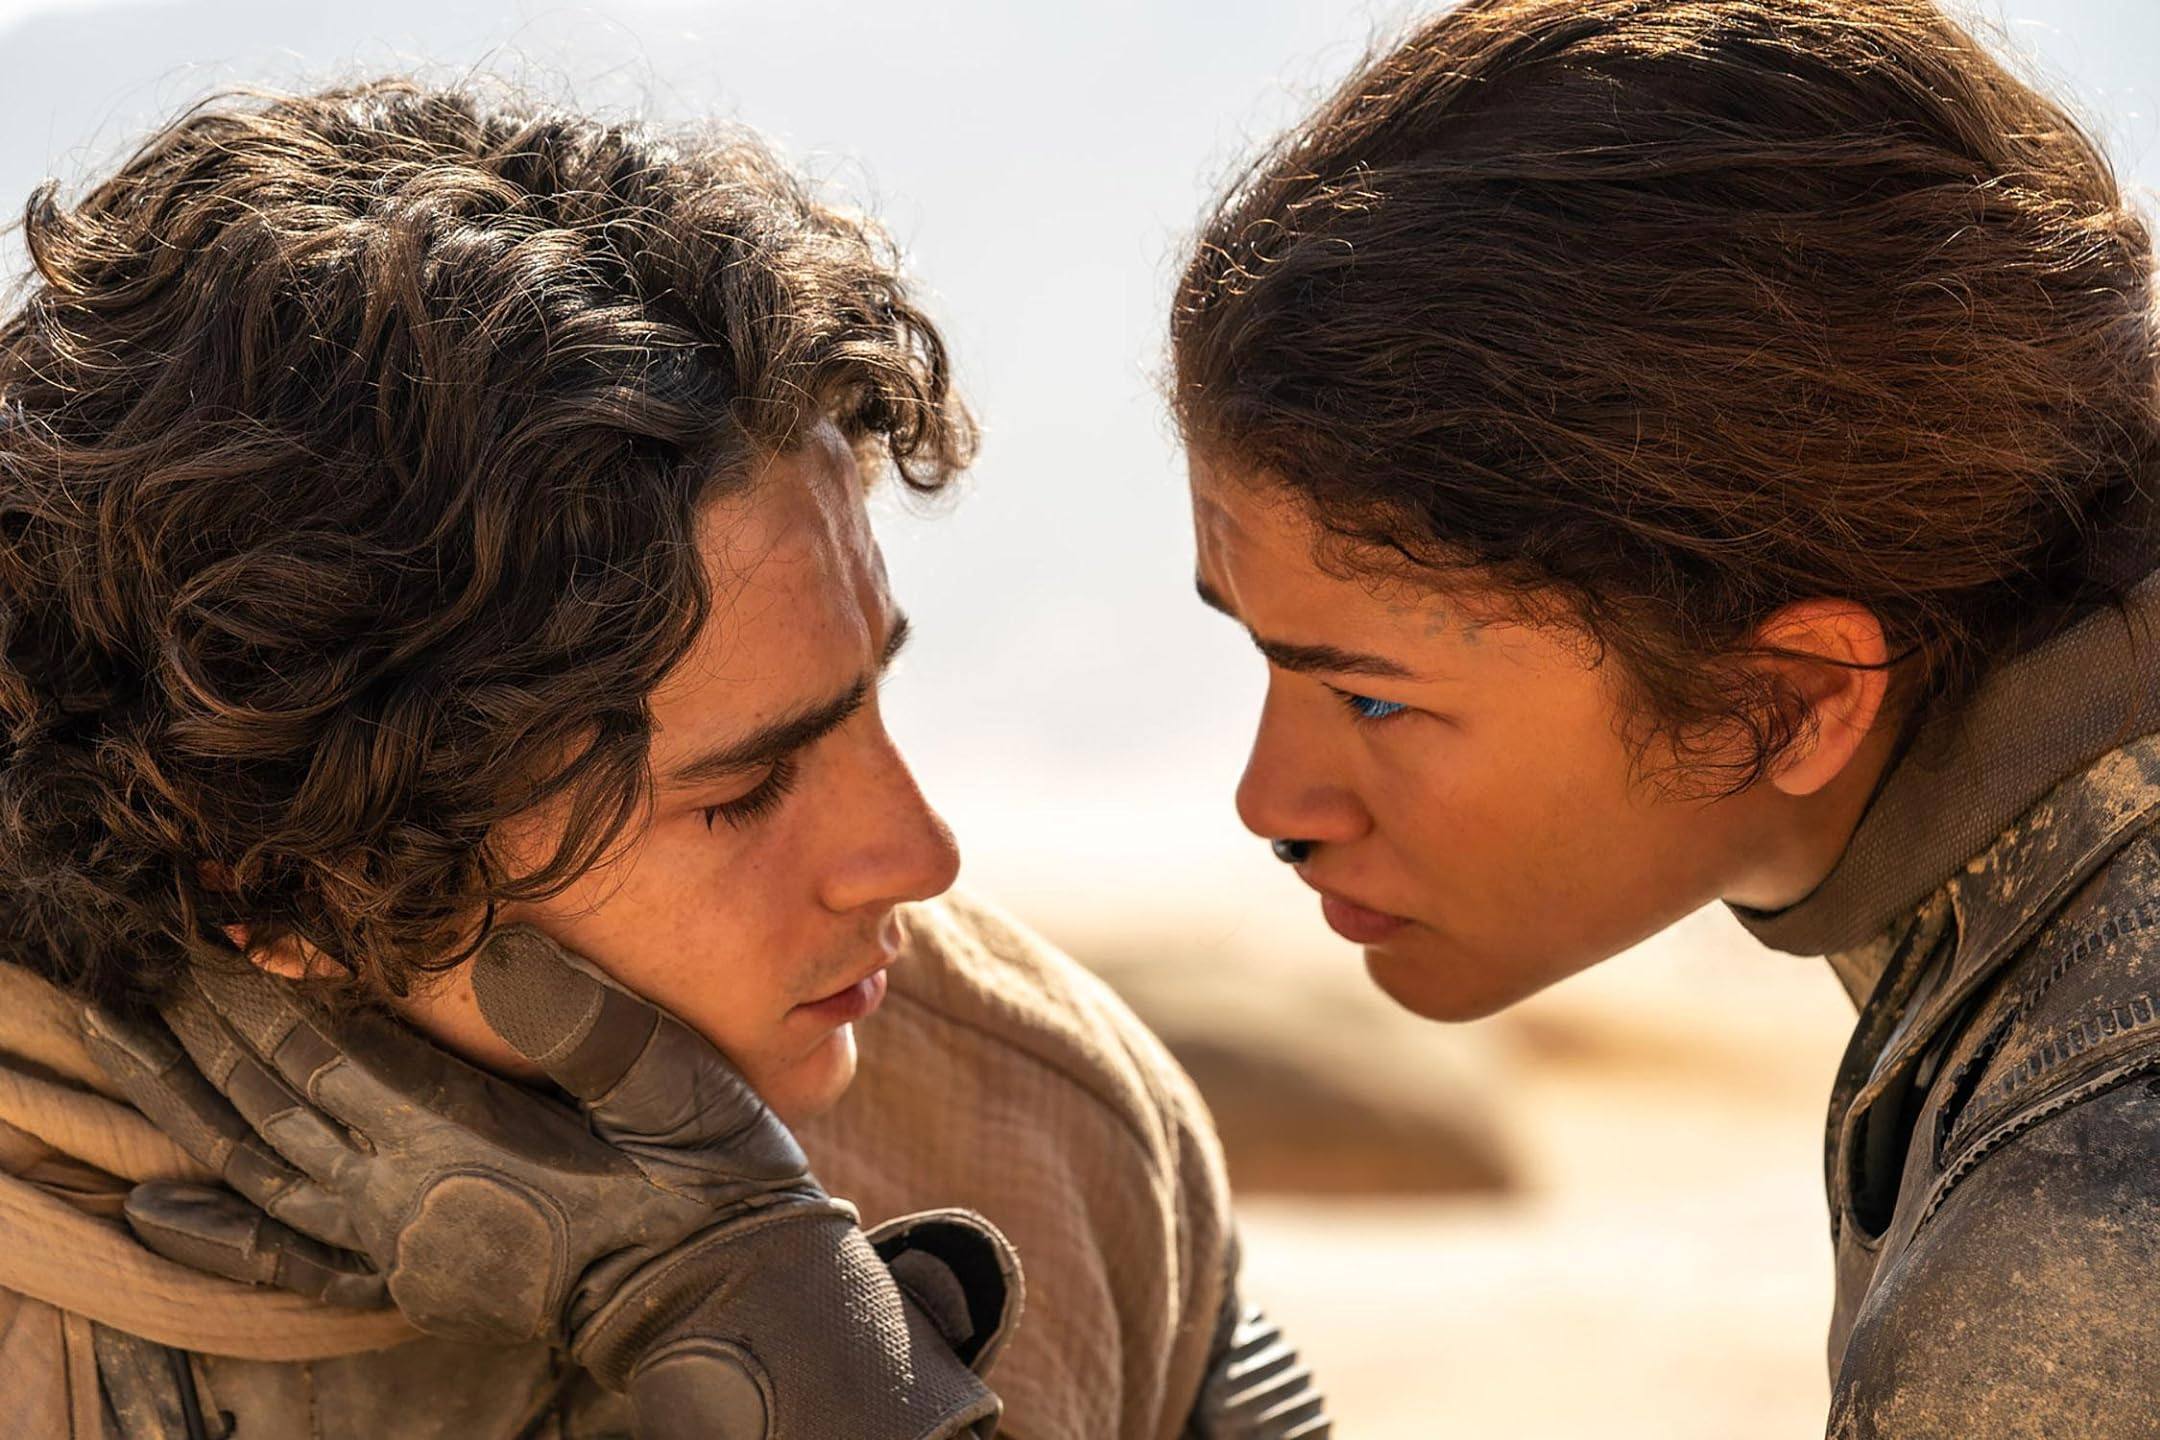 Timothée Chalamet (left) and Zendaya in a still from “Dune: Part Two”. Photo: Niko Tavernise.